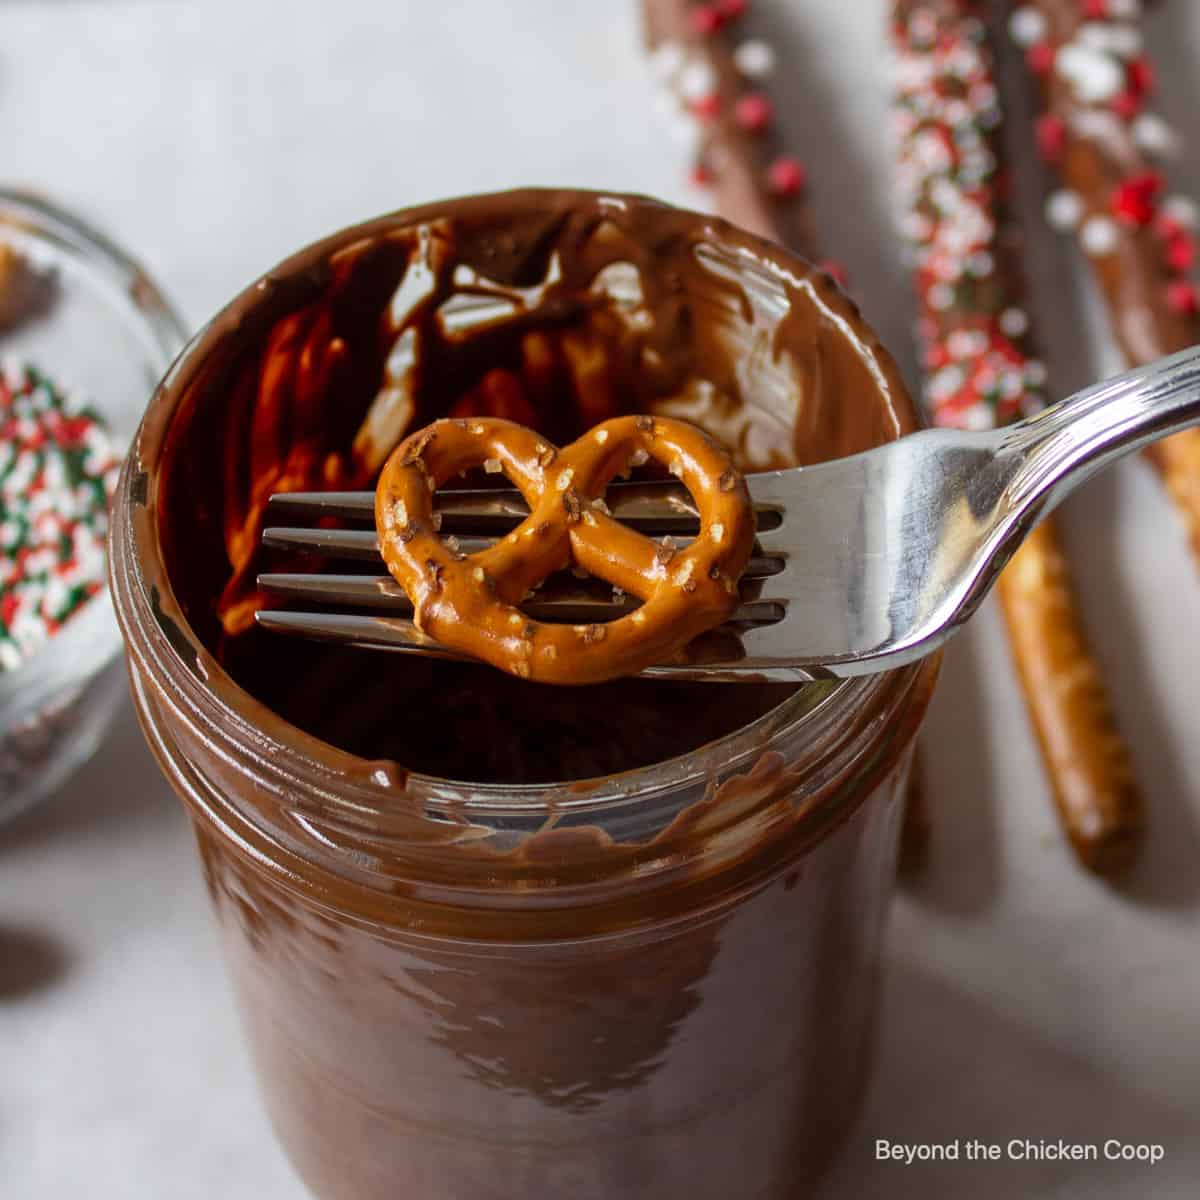 A pretzel on a fork over a jar of melted chocolate.